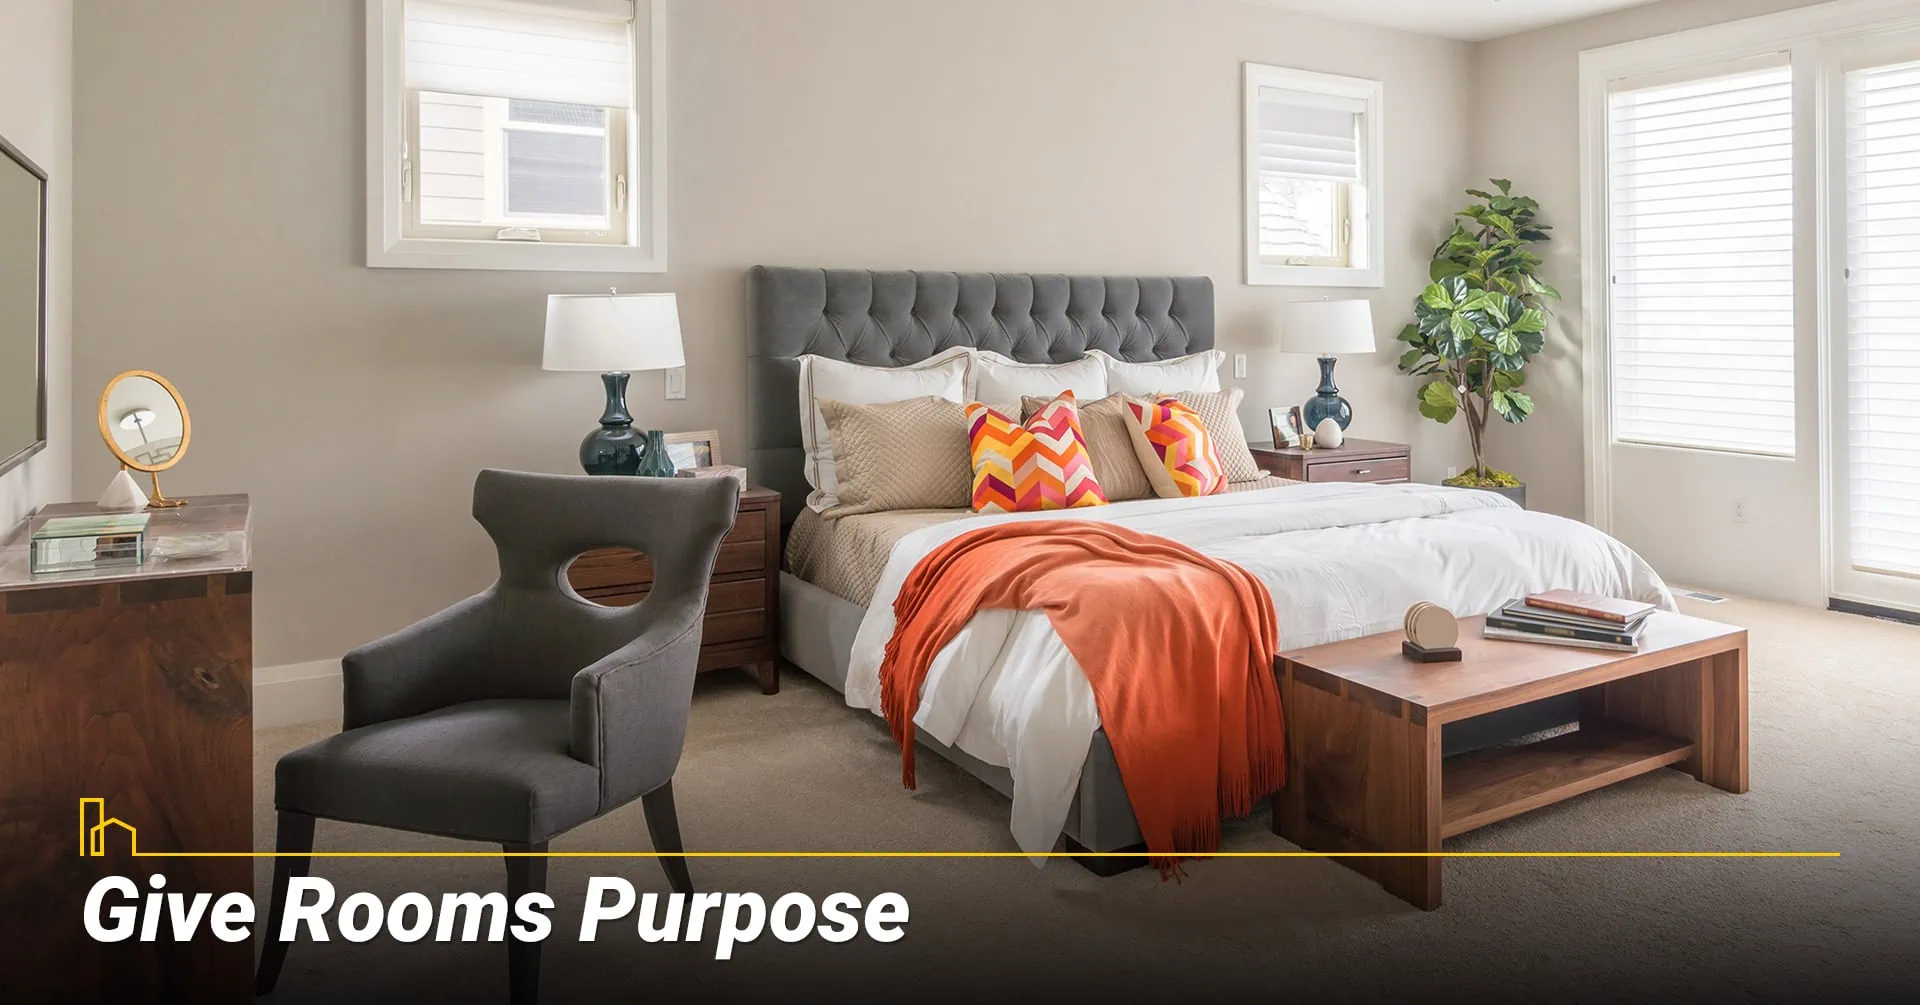 Give Rooms Purpose